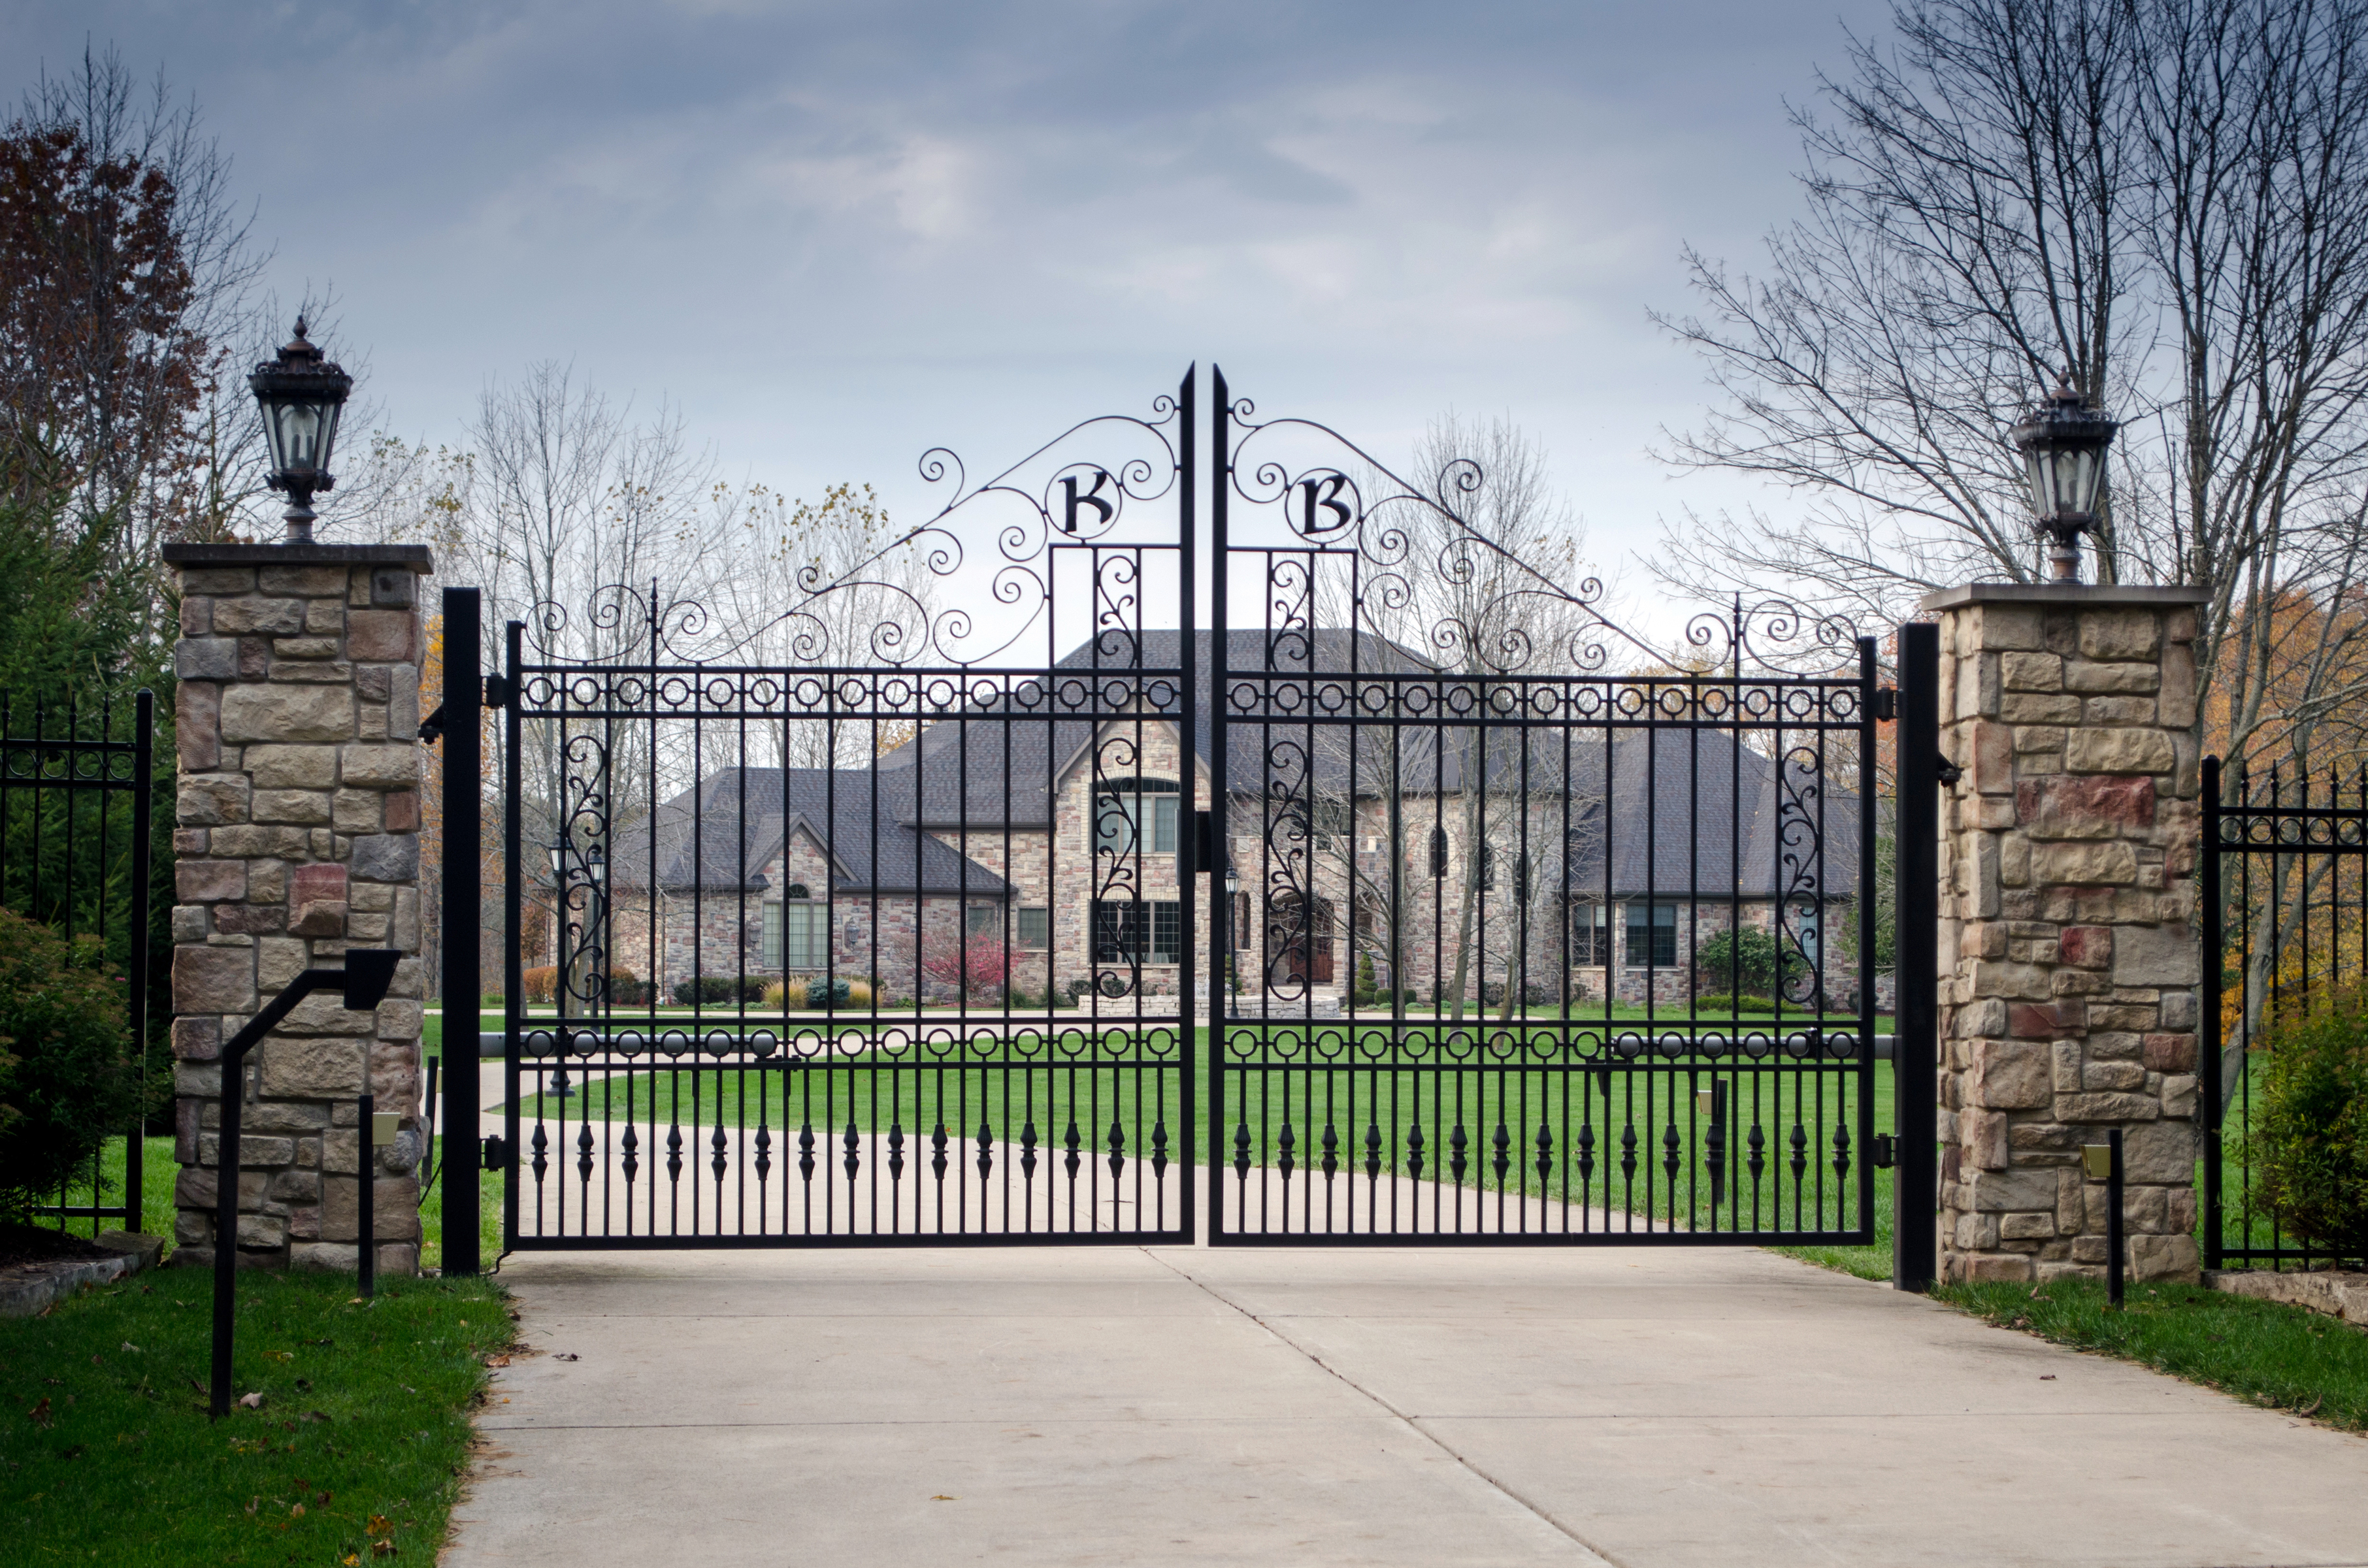 Fancy large mansion behind a locked gate | Source: Shutterstock.com